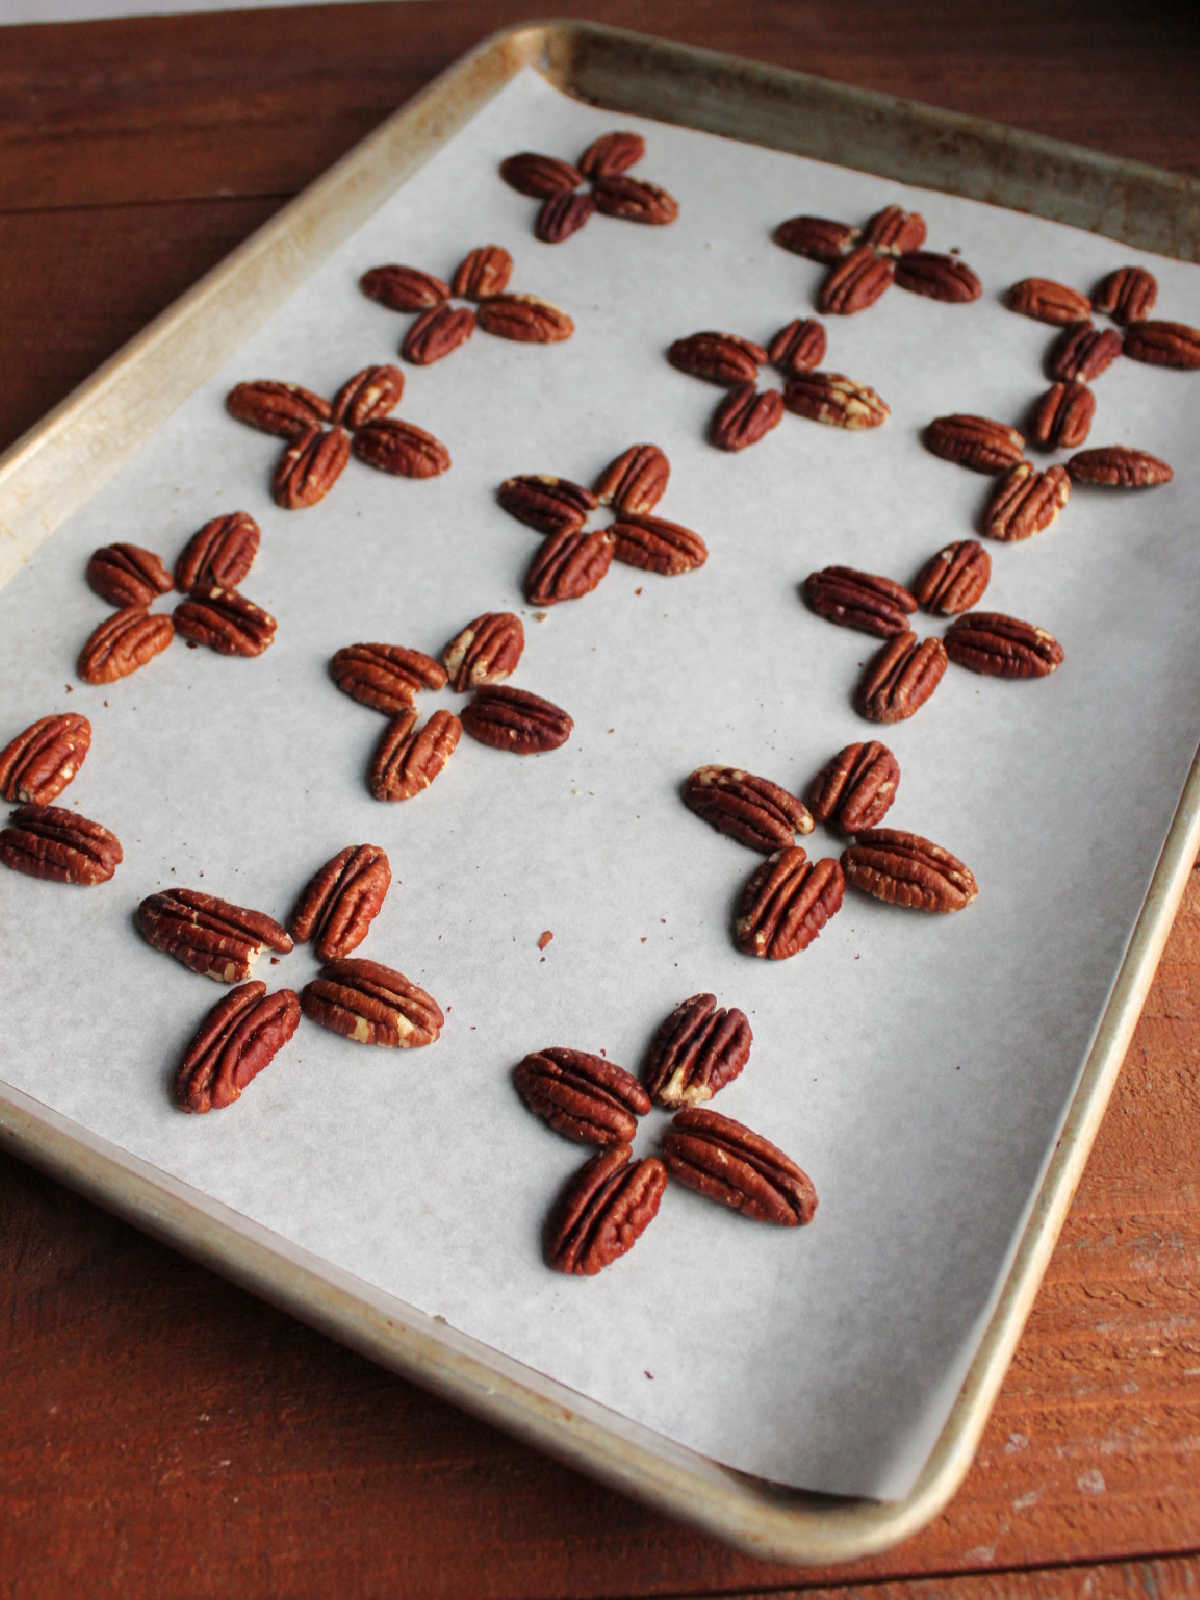 Parchment paper lined baking sheet with groups of 4 toasted pecans in cross formations to be made into turtles.